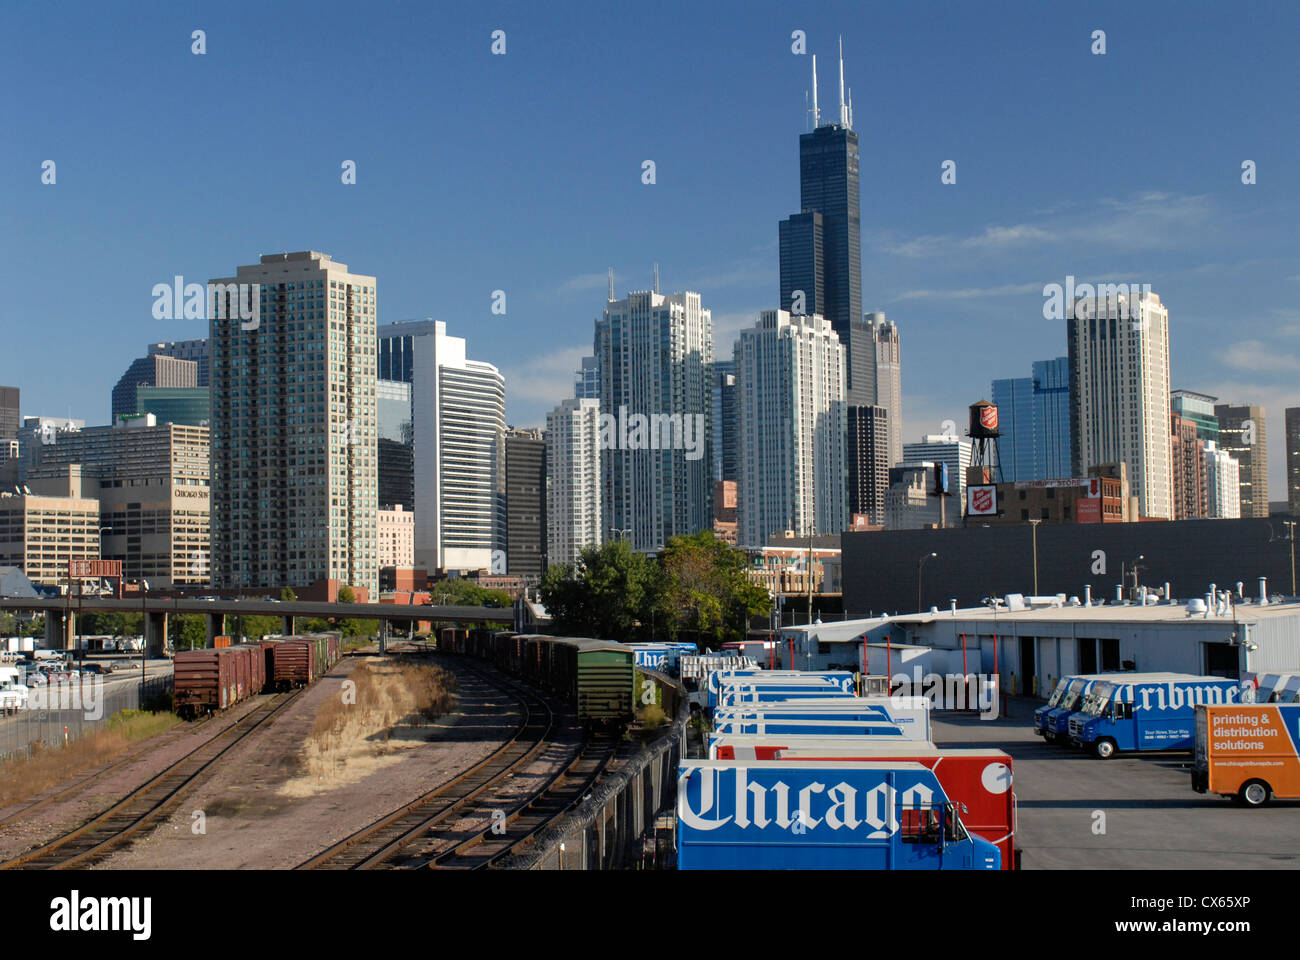 Chicago Tribune newspaper trucks and Chicago skyline, Illinois. The Willis Tower is the tall black building. Stock Photo